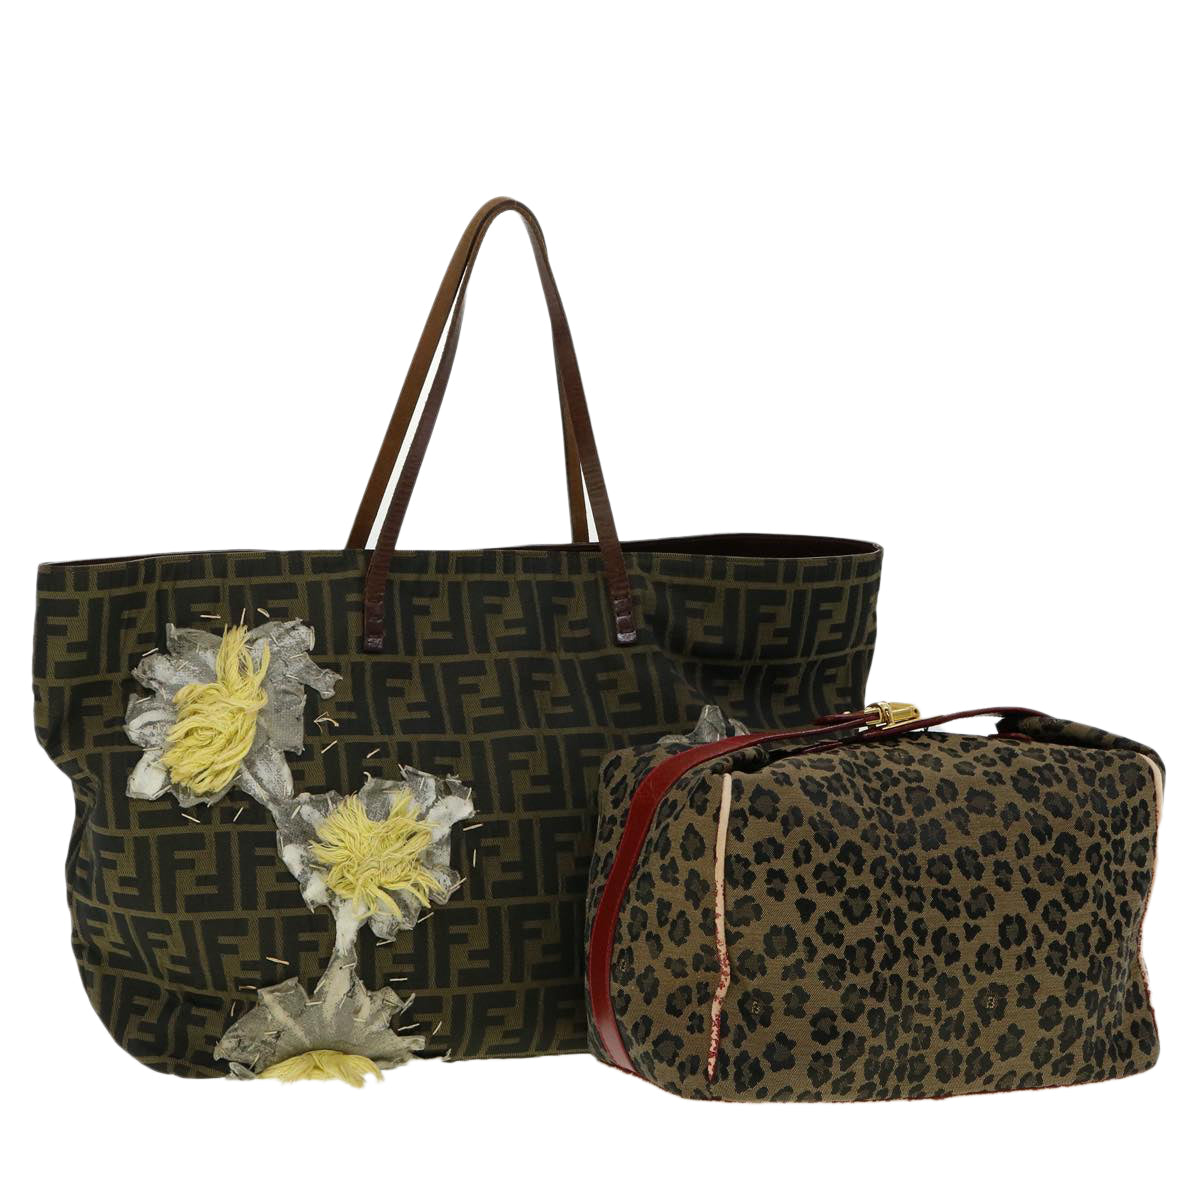 FENDI Zucca Canvas Leopard Flower Tote Bag Hand Bag 2Set Brown Red Auth 30898